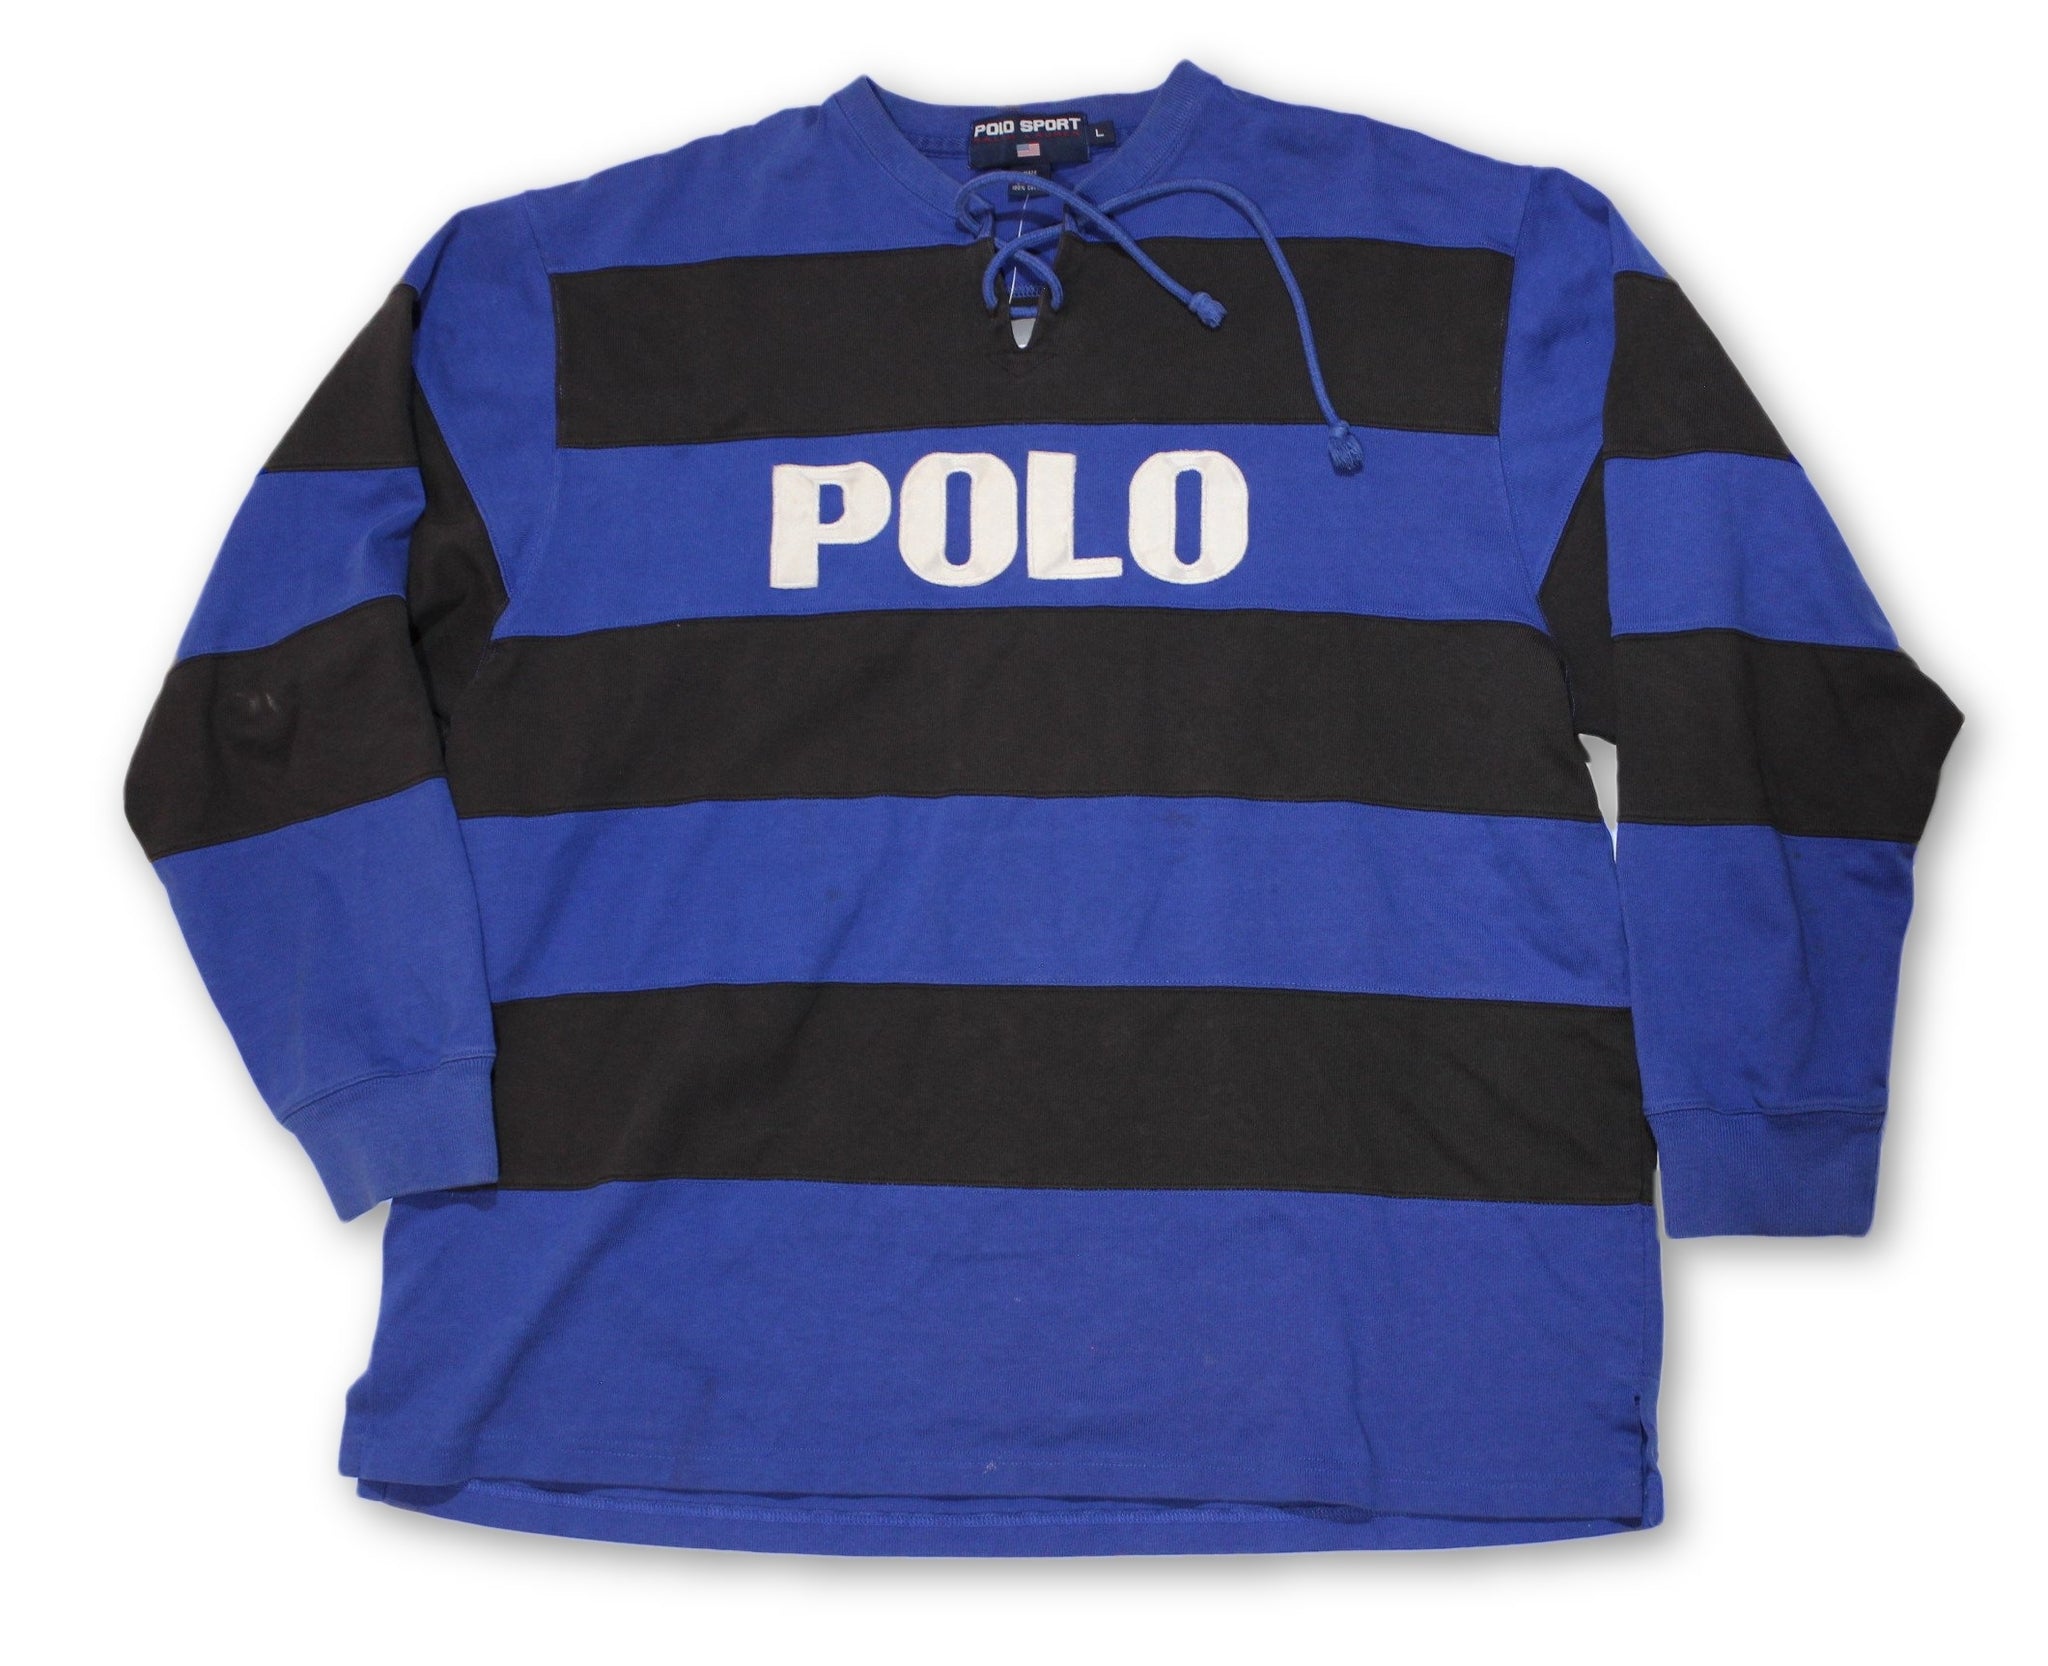 Vintage Ralph Lauren Polo Sport Polo Rugby Shirt